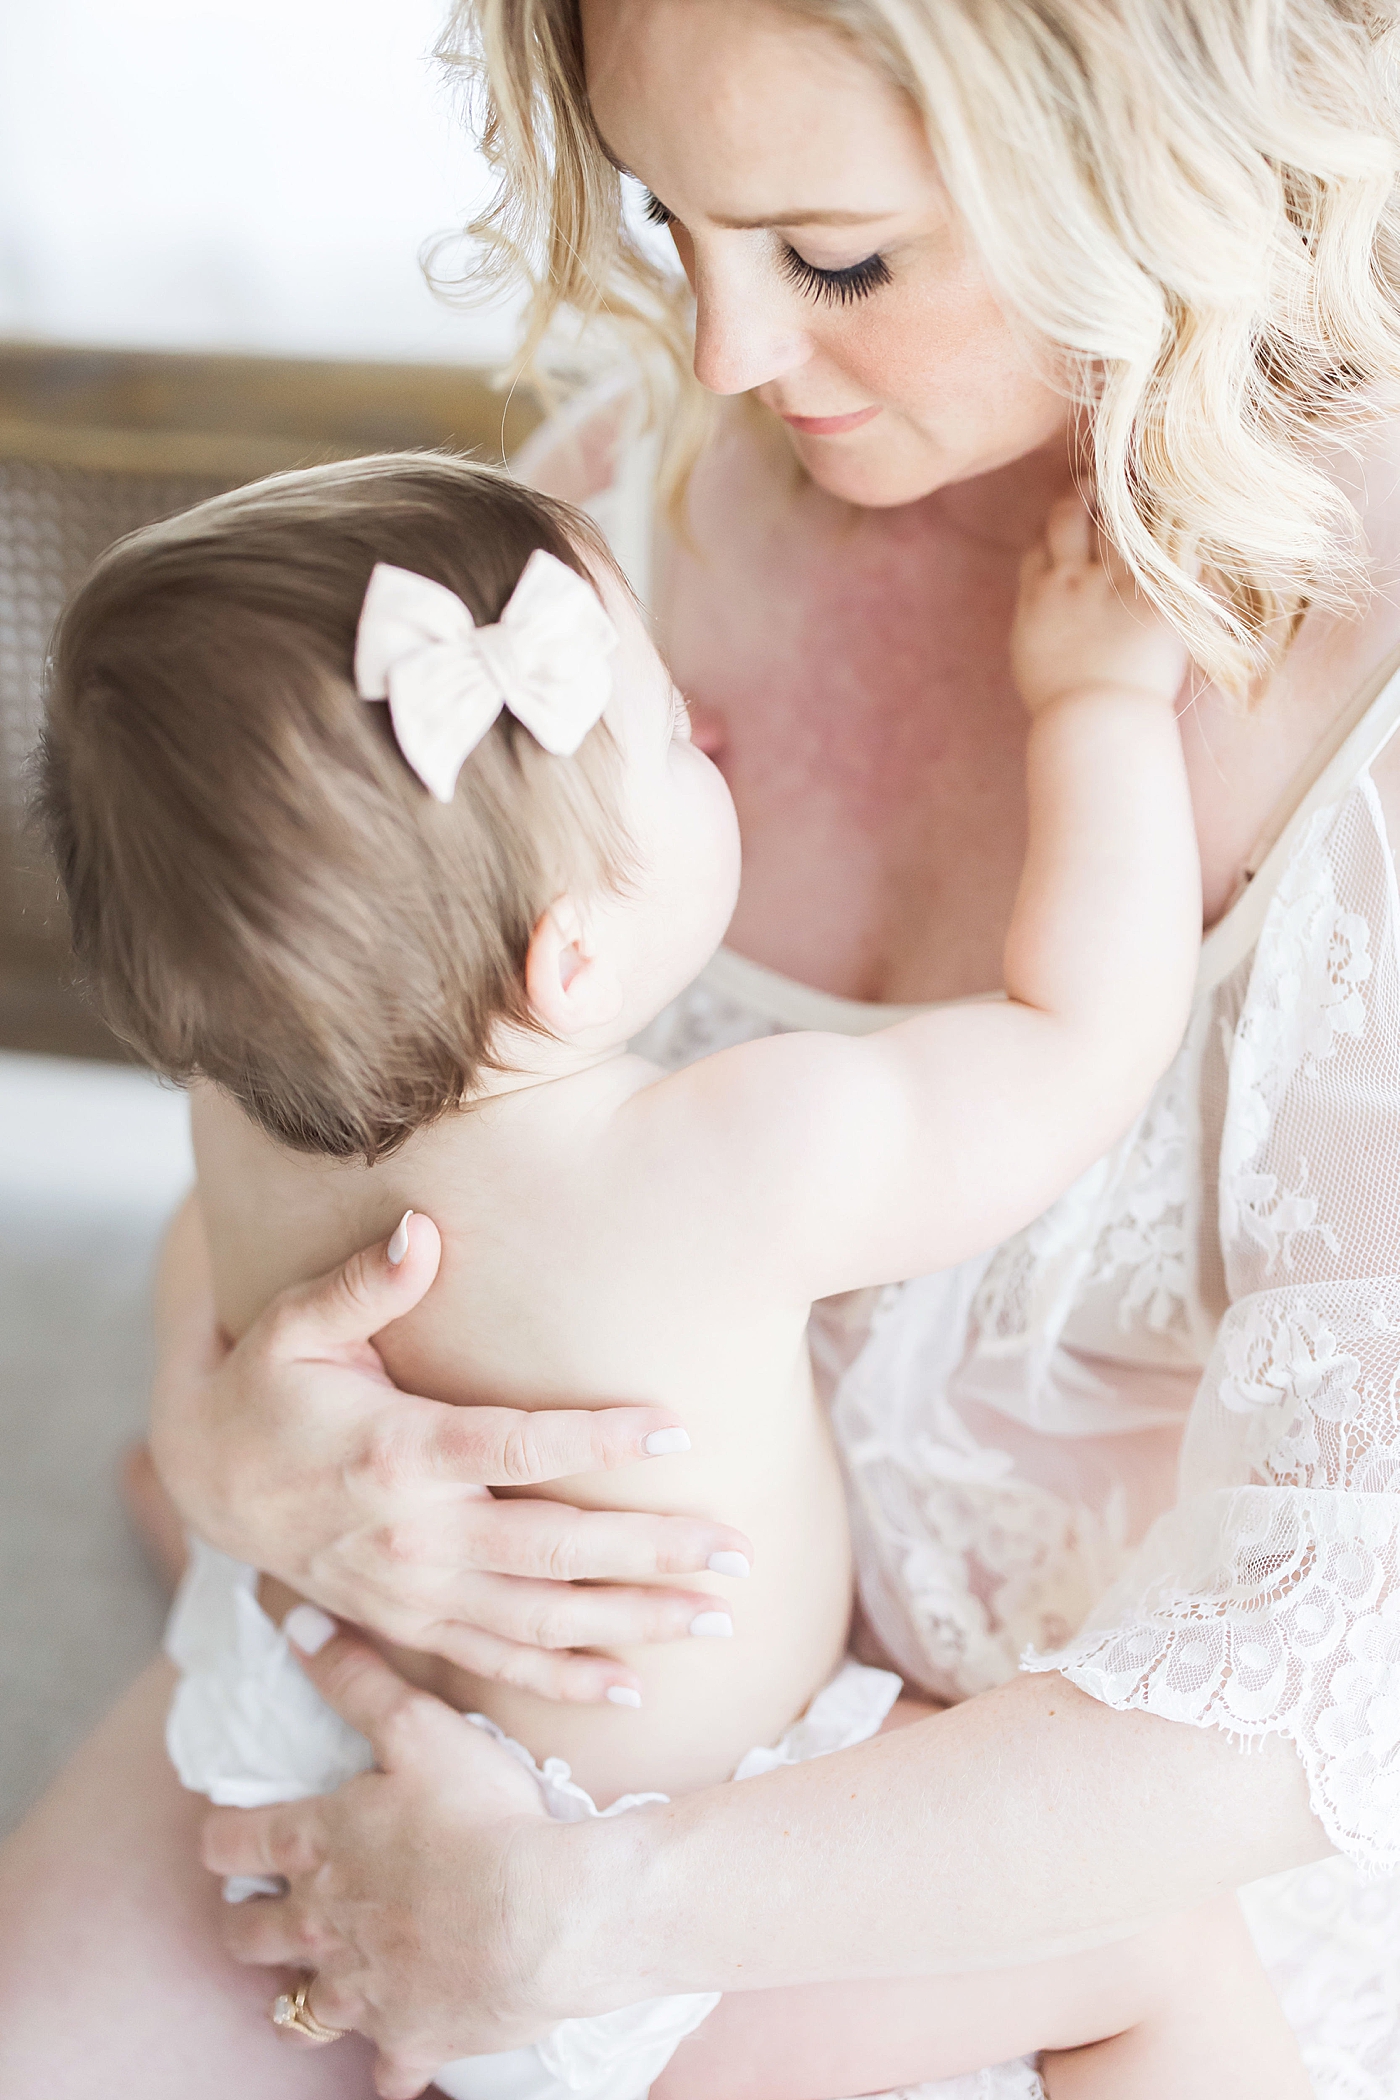 Mom holding daughter in her lap. Photo by Fresh Light Photography.